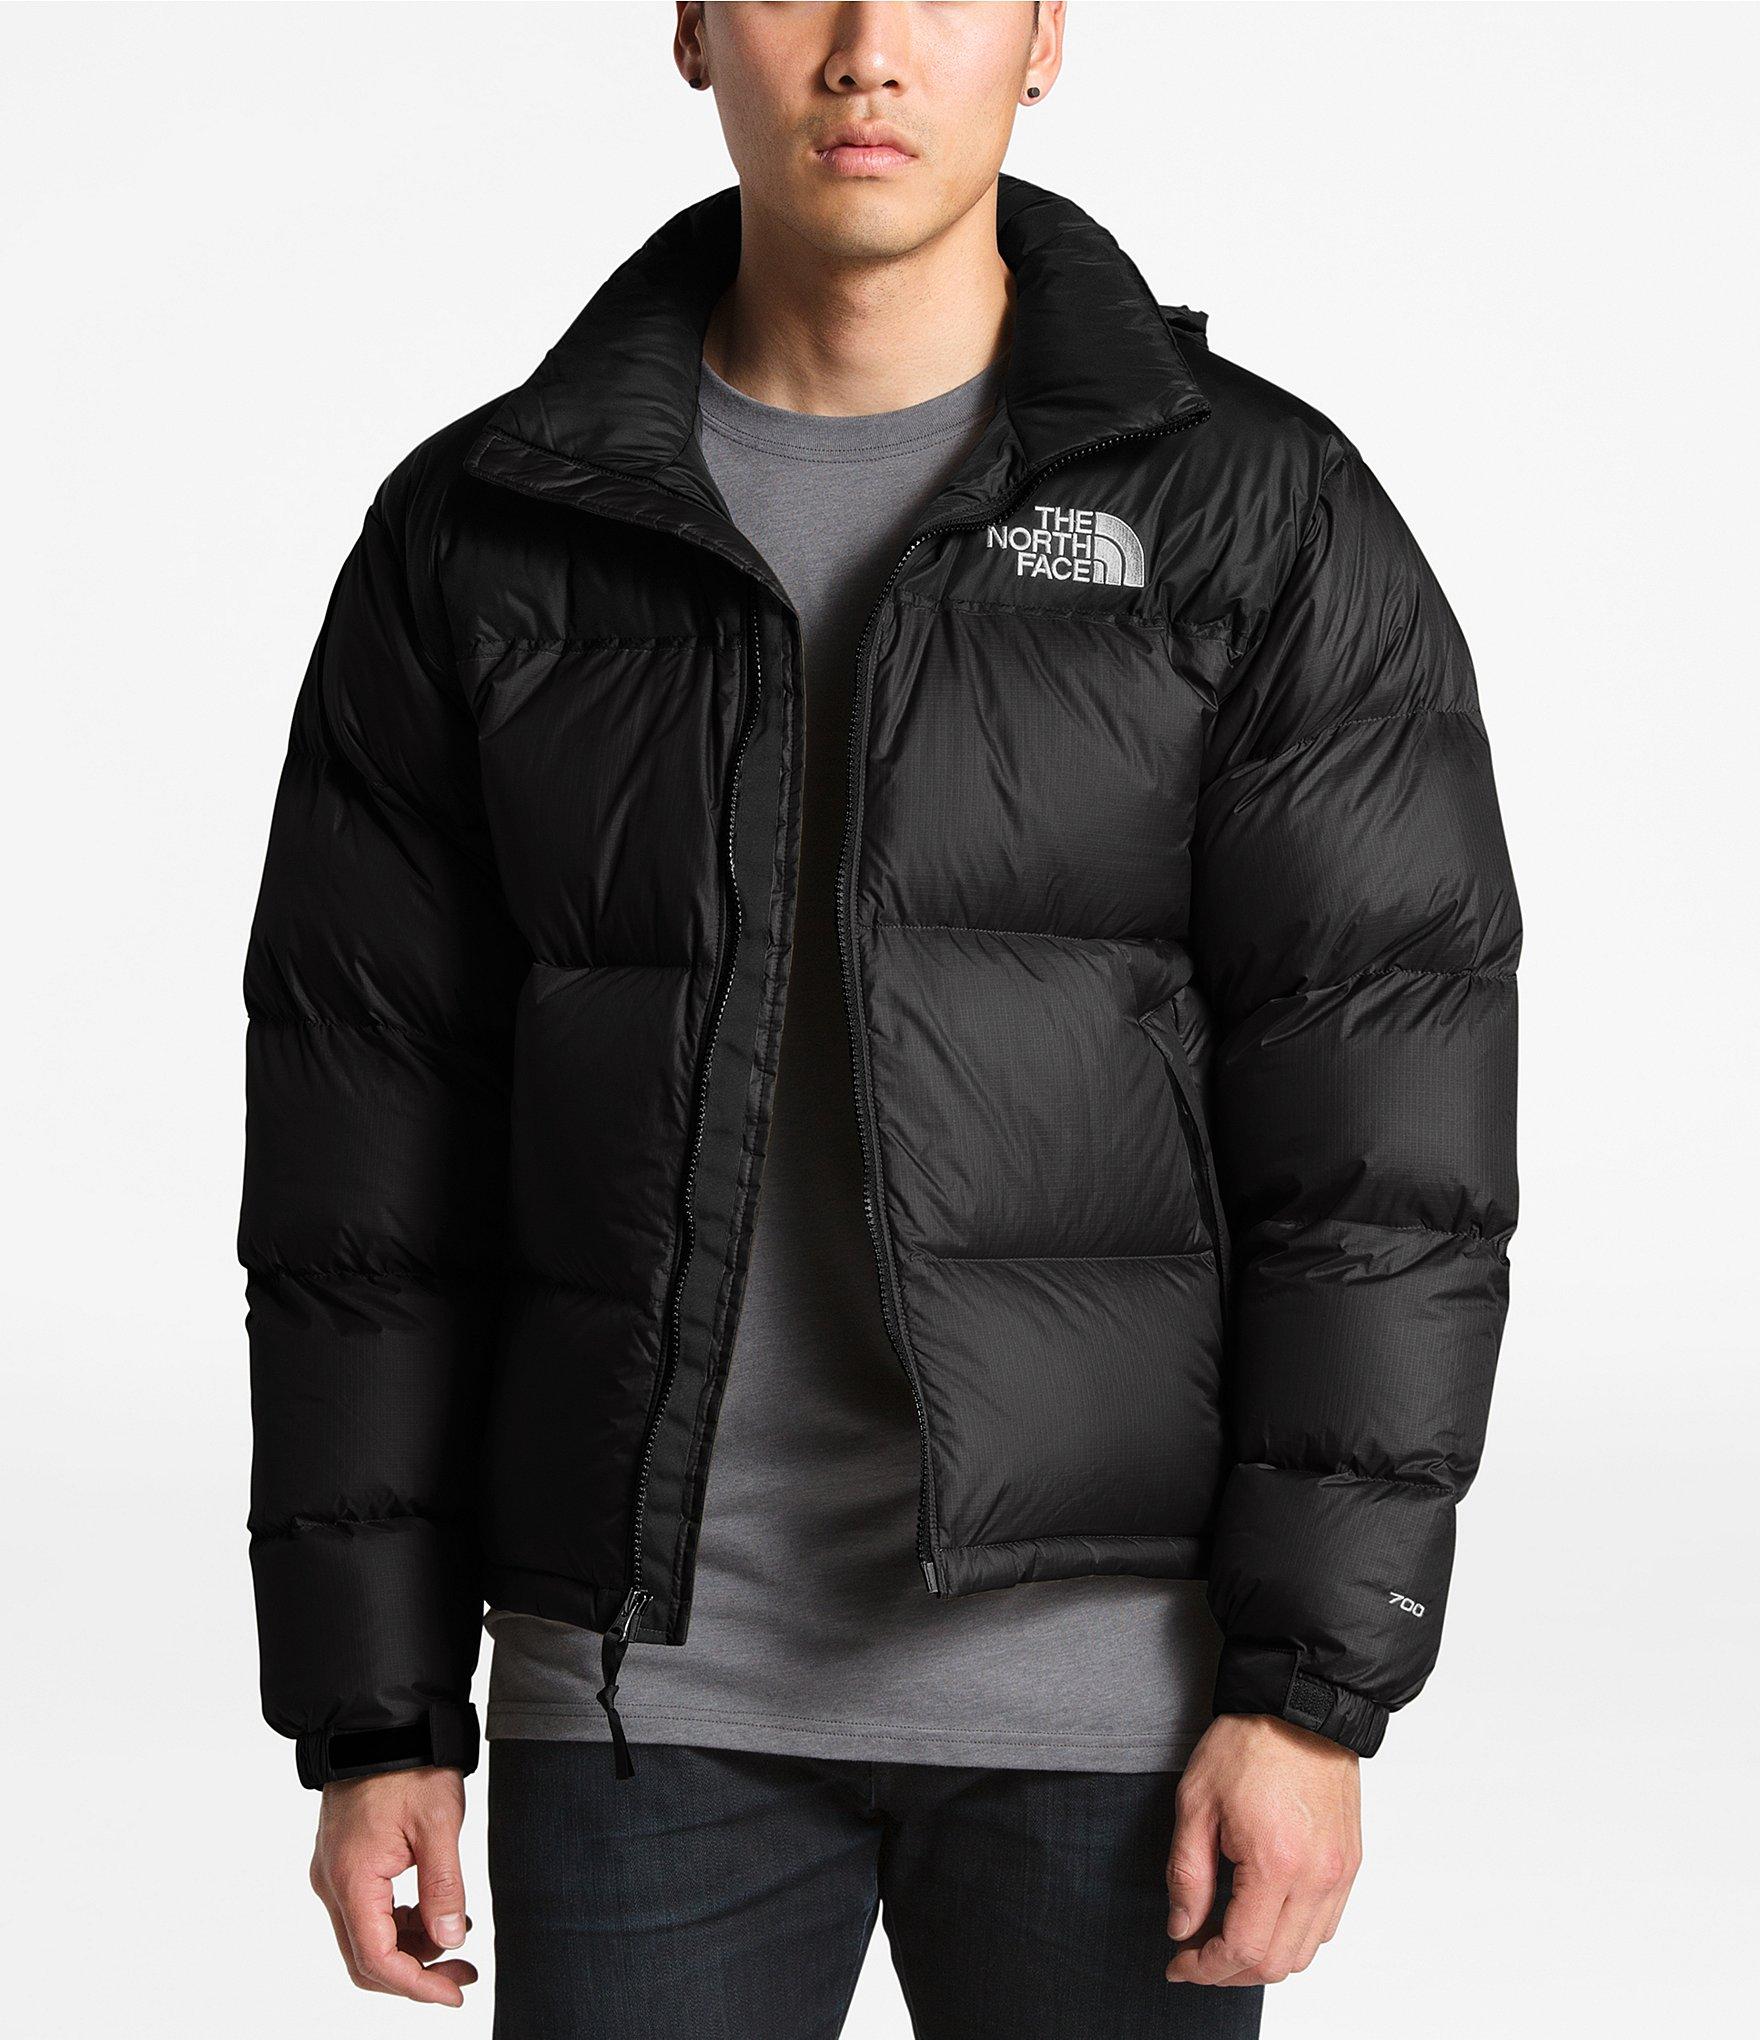 the north face nuptse jacket 700 Online 